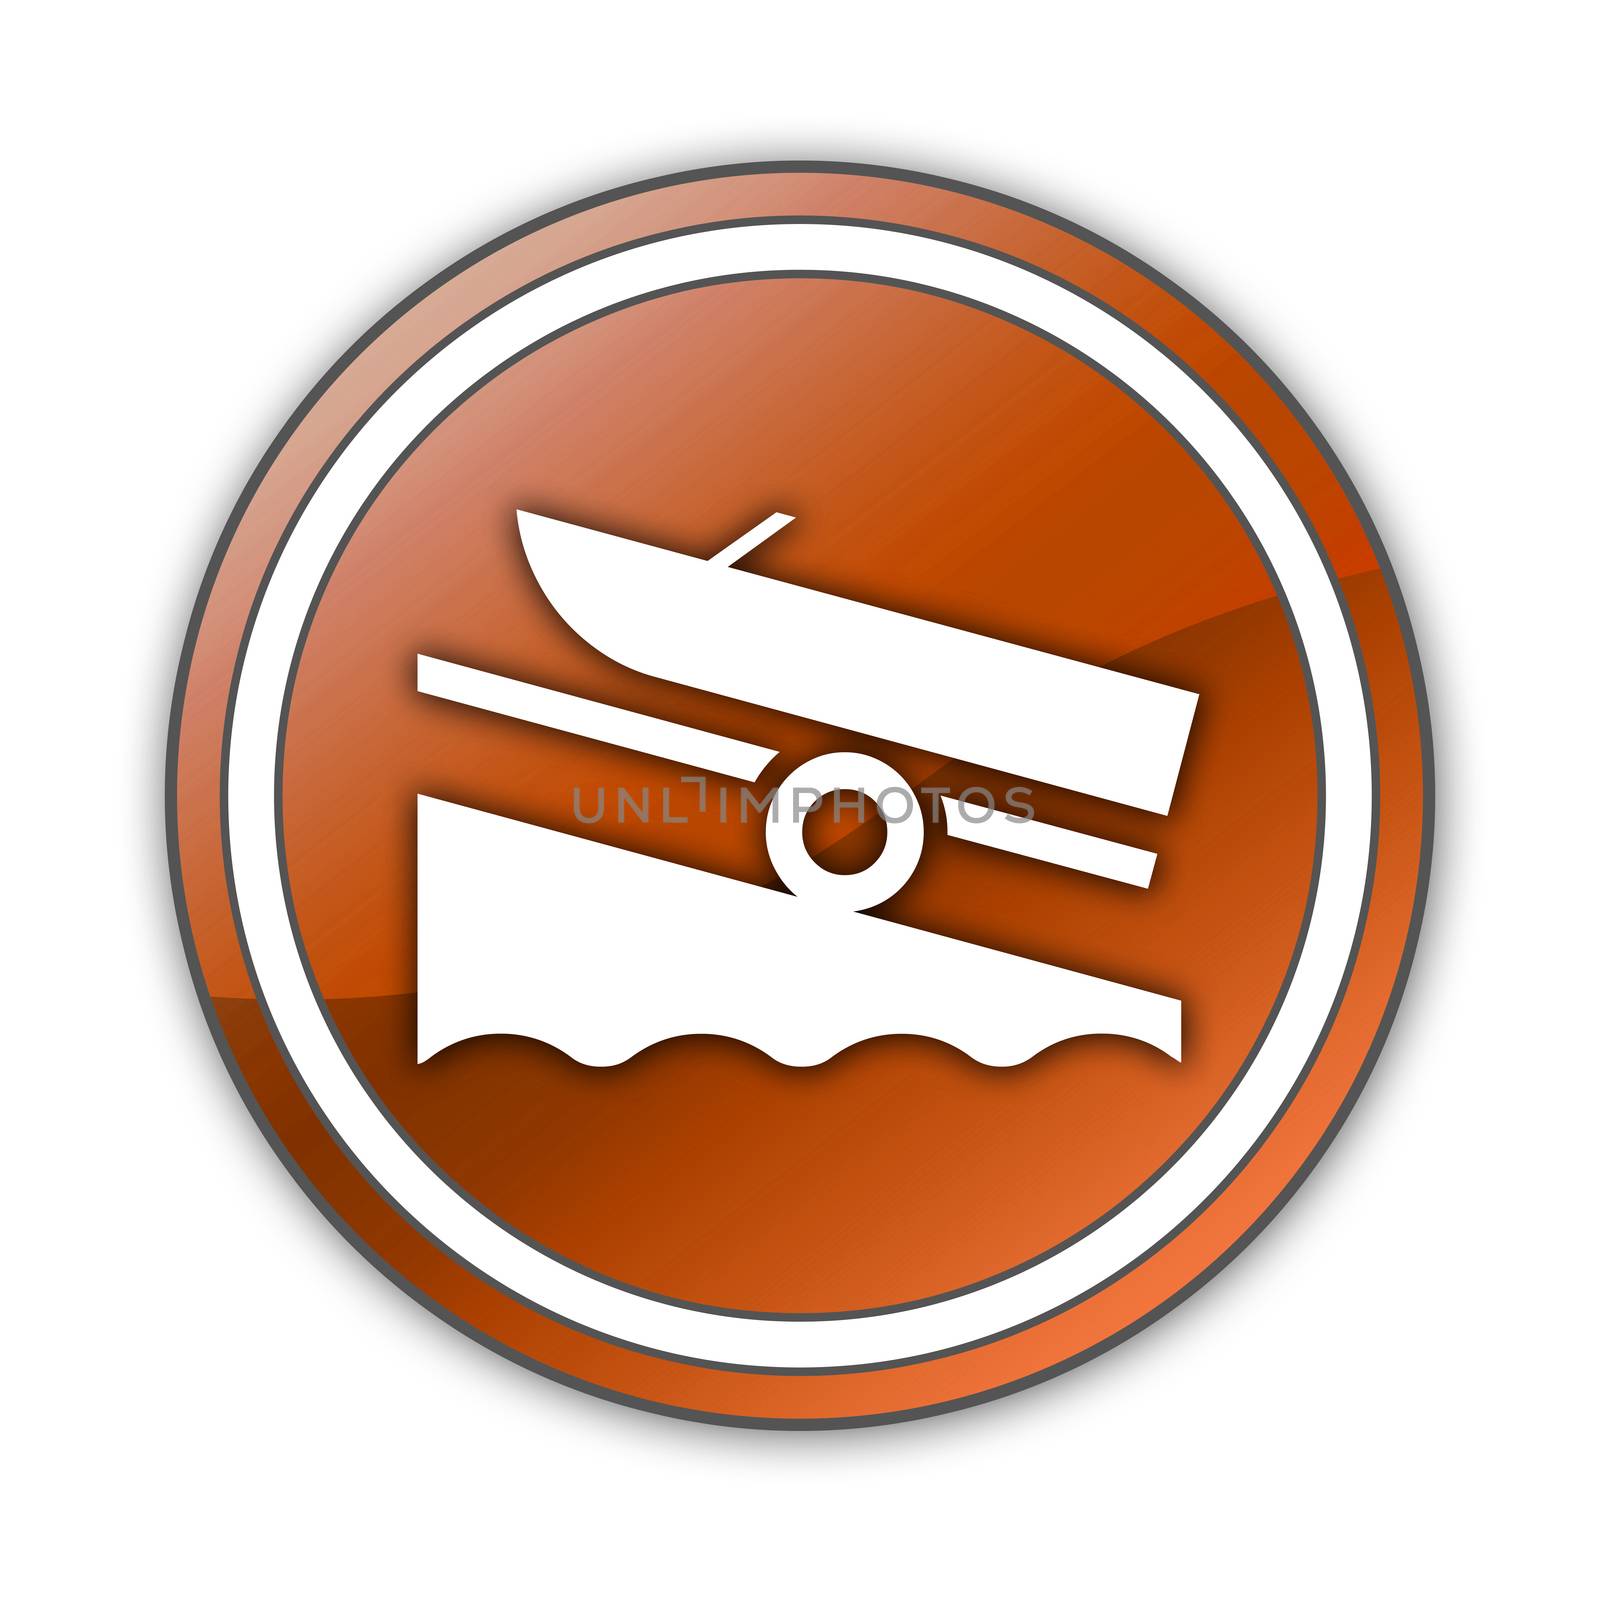 Icon, Button, Pictogram with Boat Ramp symbol